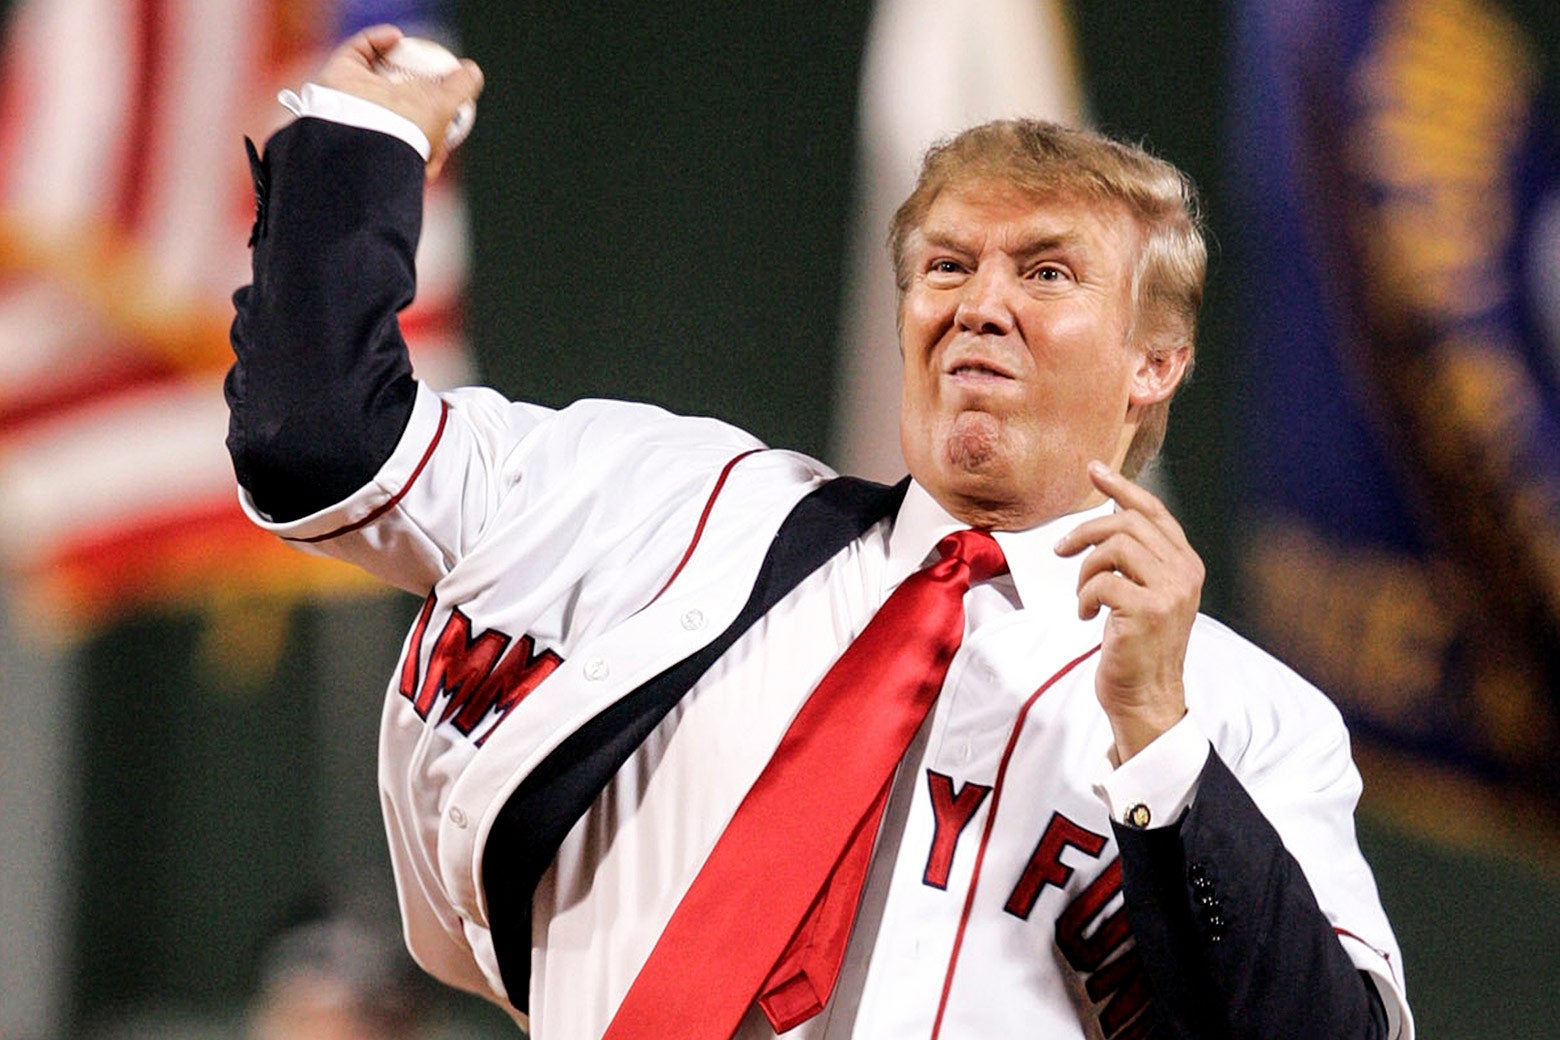 Donald Trump throwing a pitch in 2006.